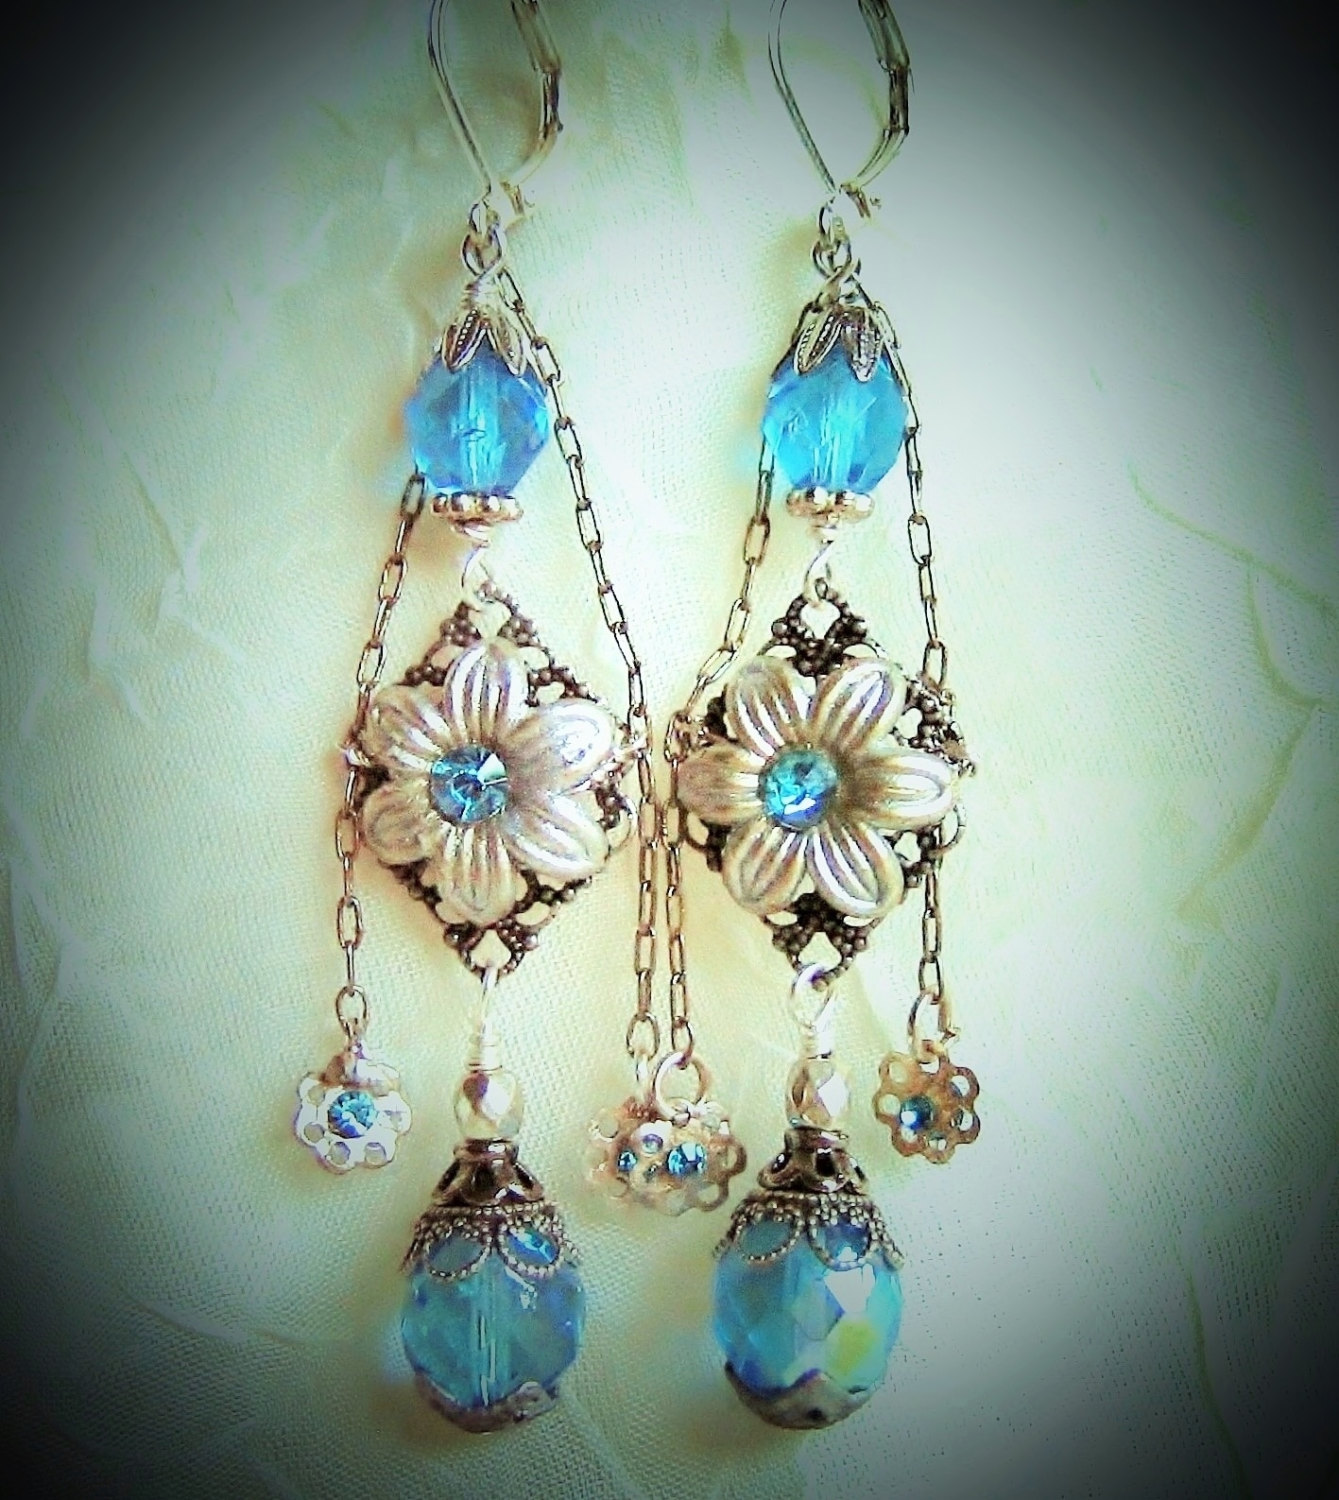 Earrings, Antiqued Silver With Aqua Czech Crystal Beads, Swarovski Chatons, Statement Earrings, Steampunk, Hendrika steampunk buy now online